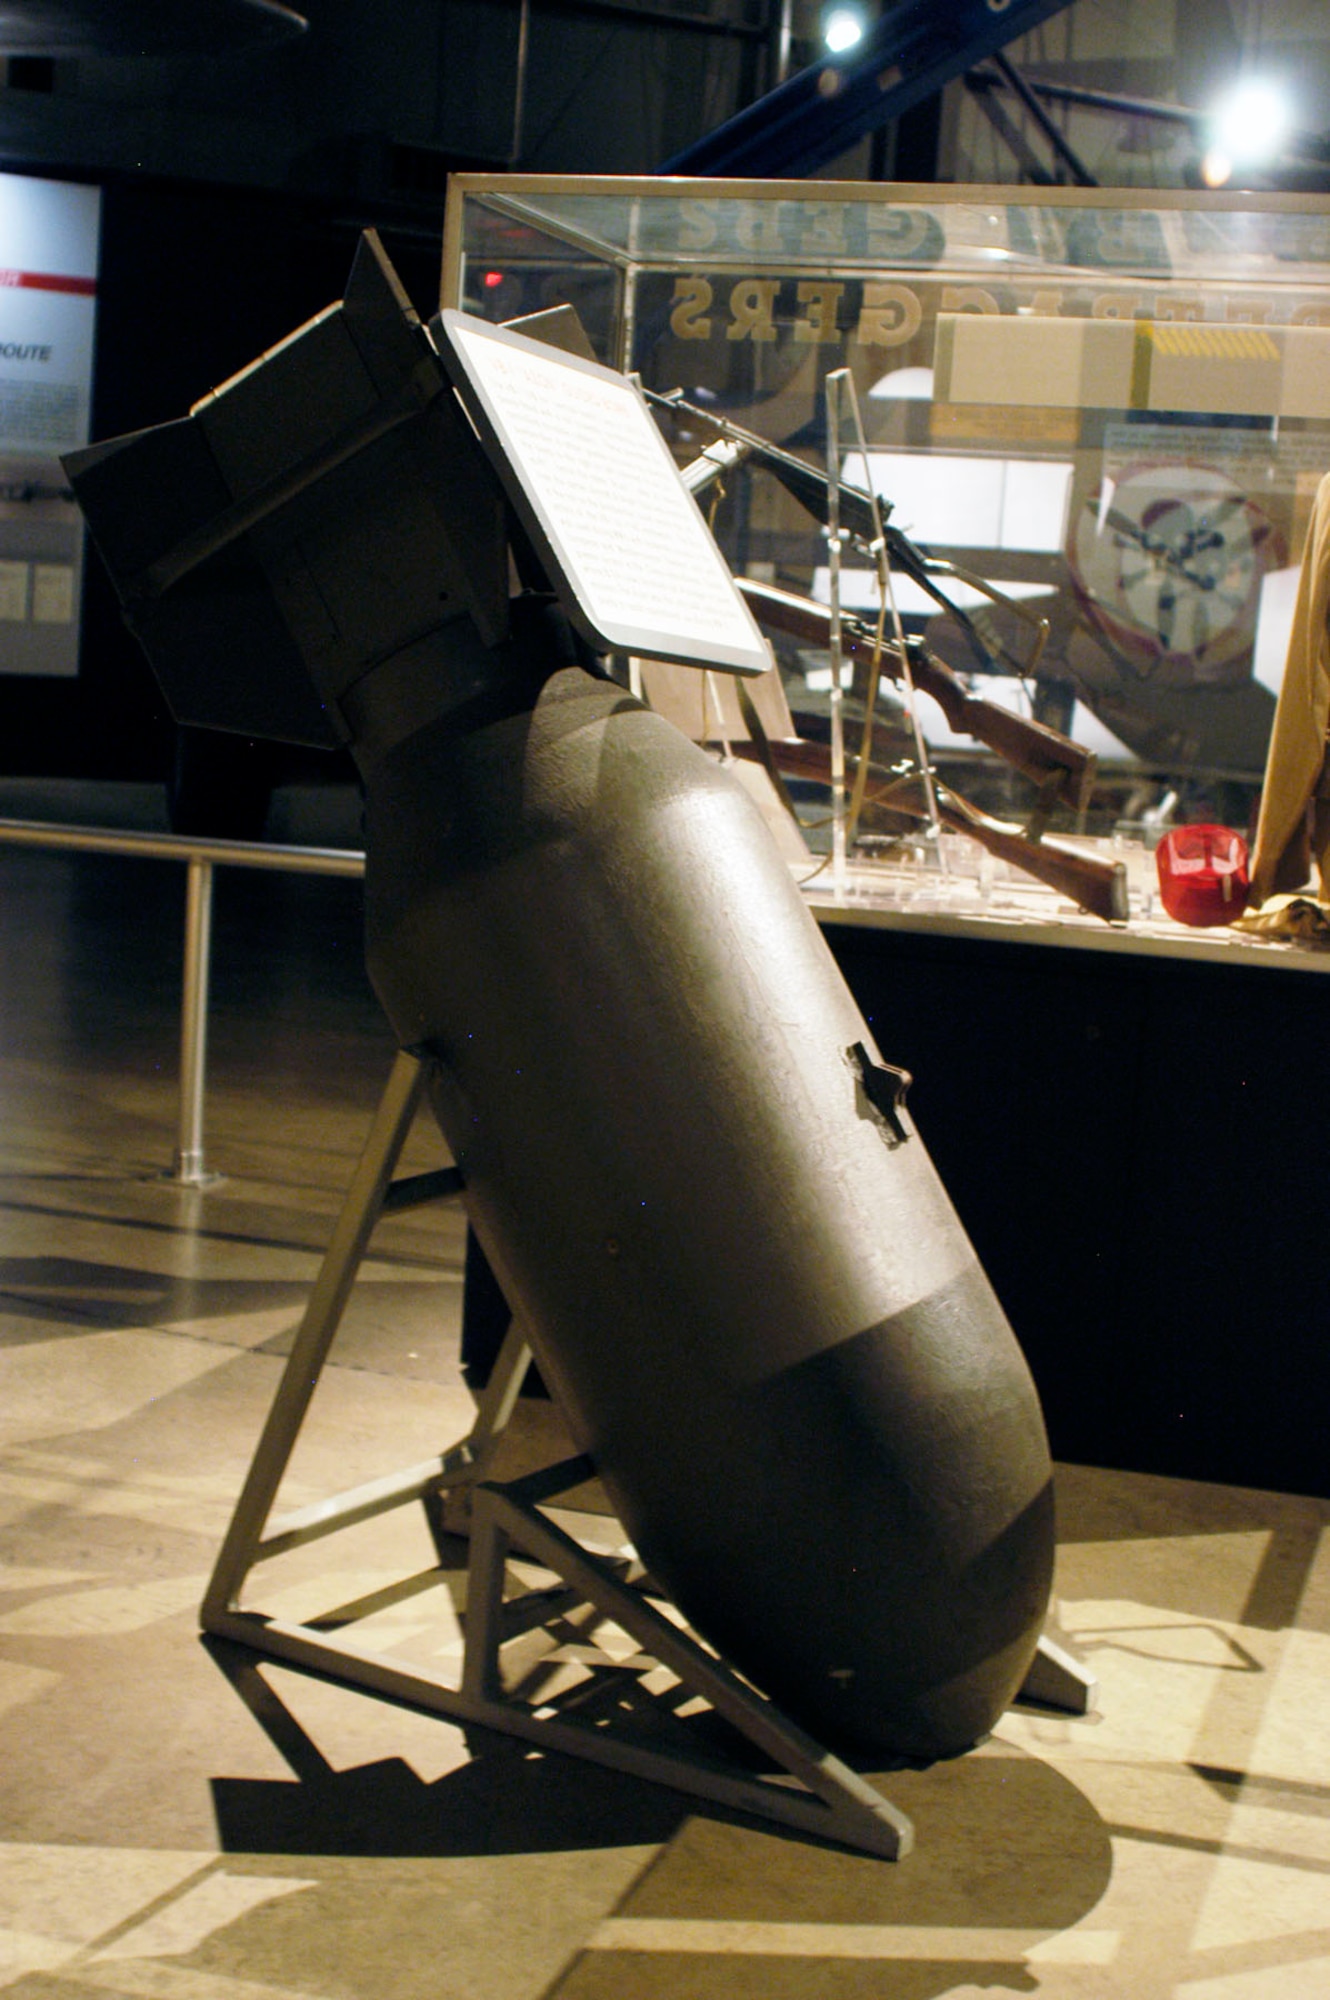 DAYTON, Ohio -- VB-1 Azon Guided Bomb in the World War II Gallery at the National Museum of the U.S. Air Force. (U.S. Air Force photo)